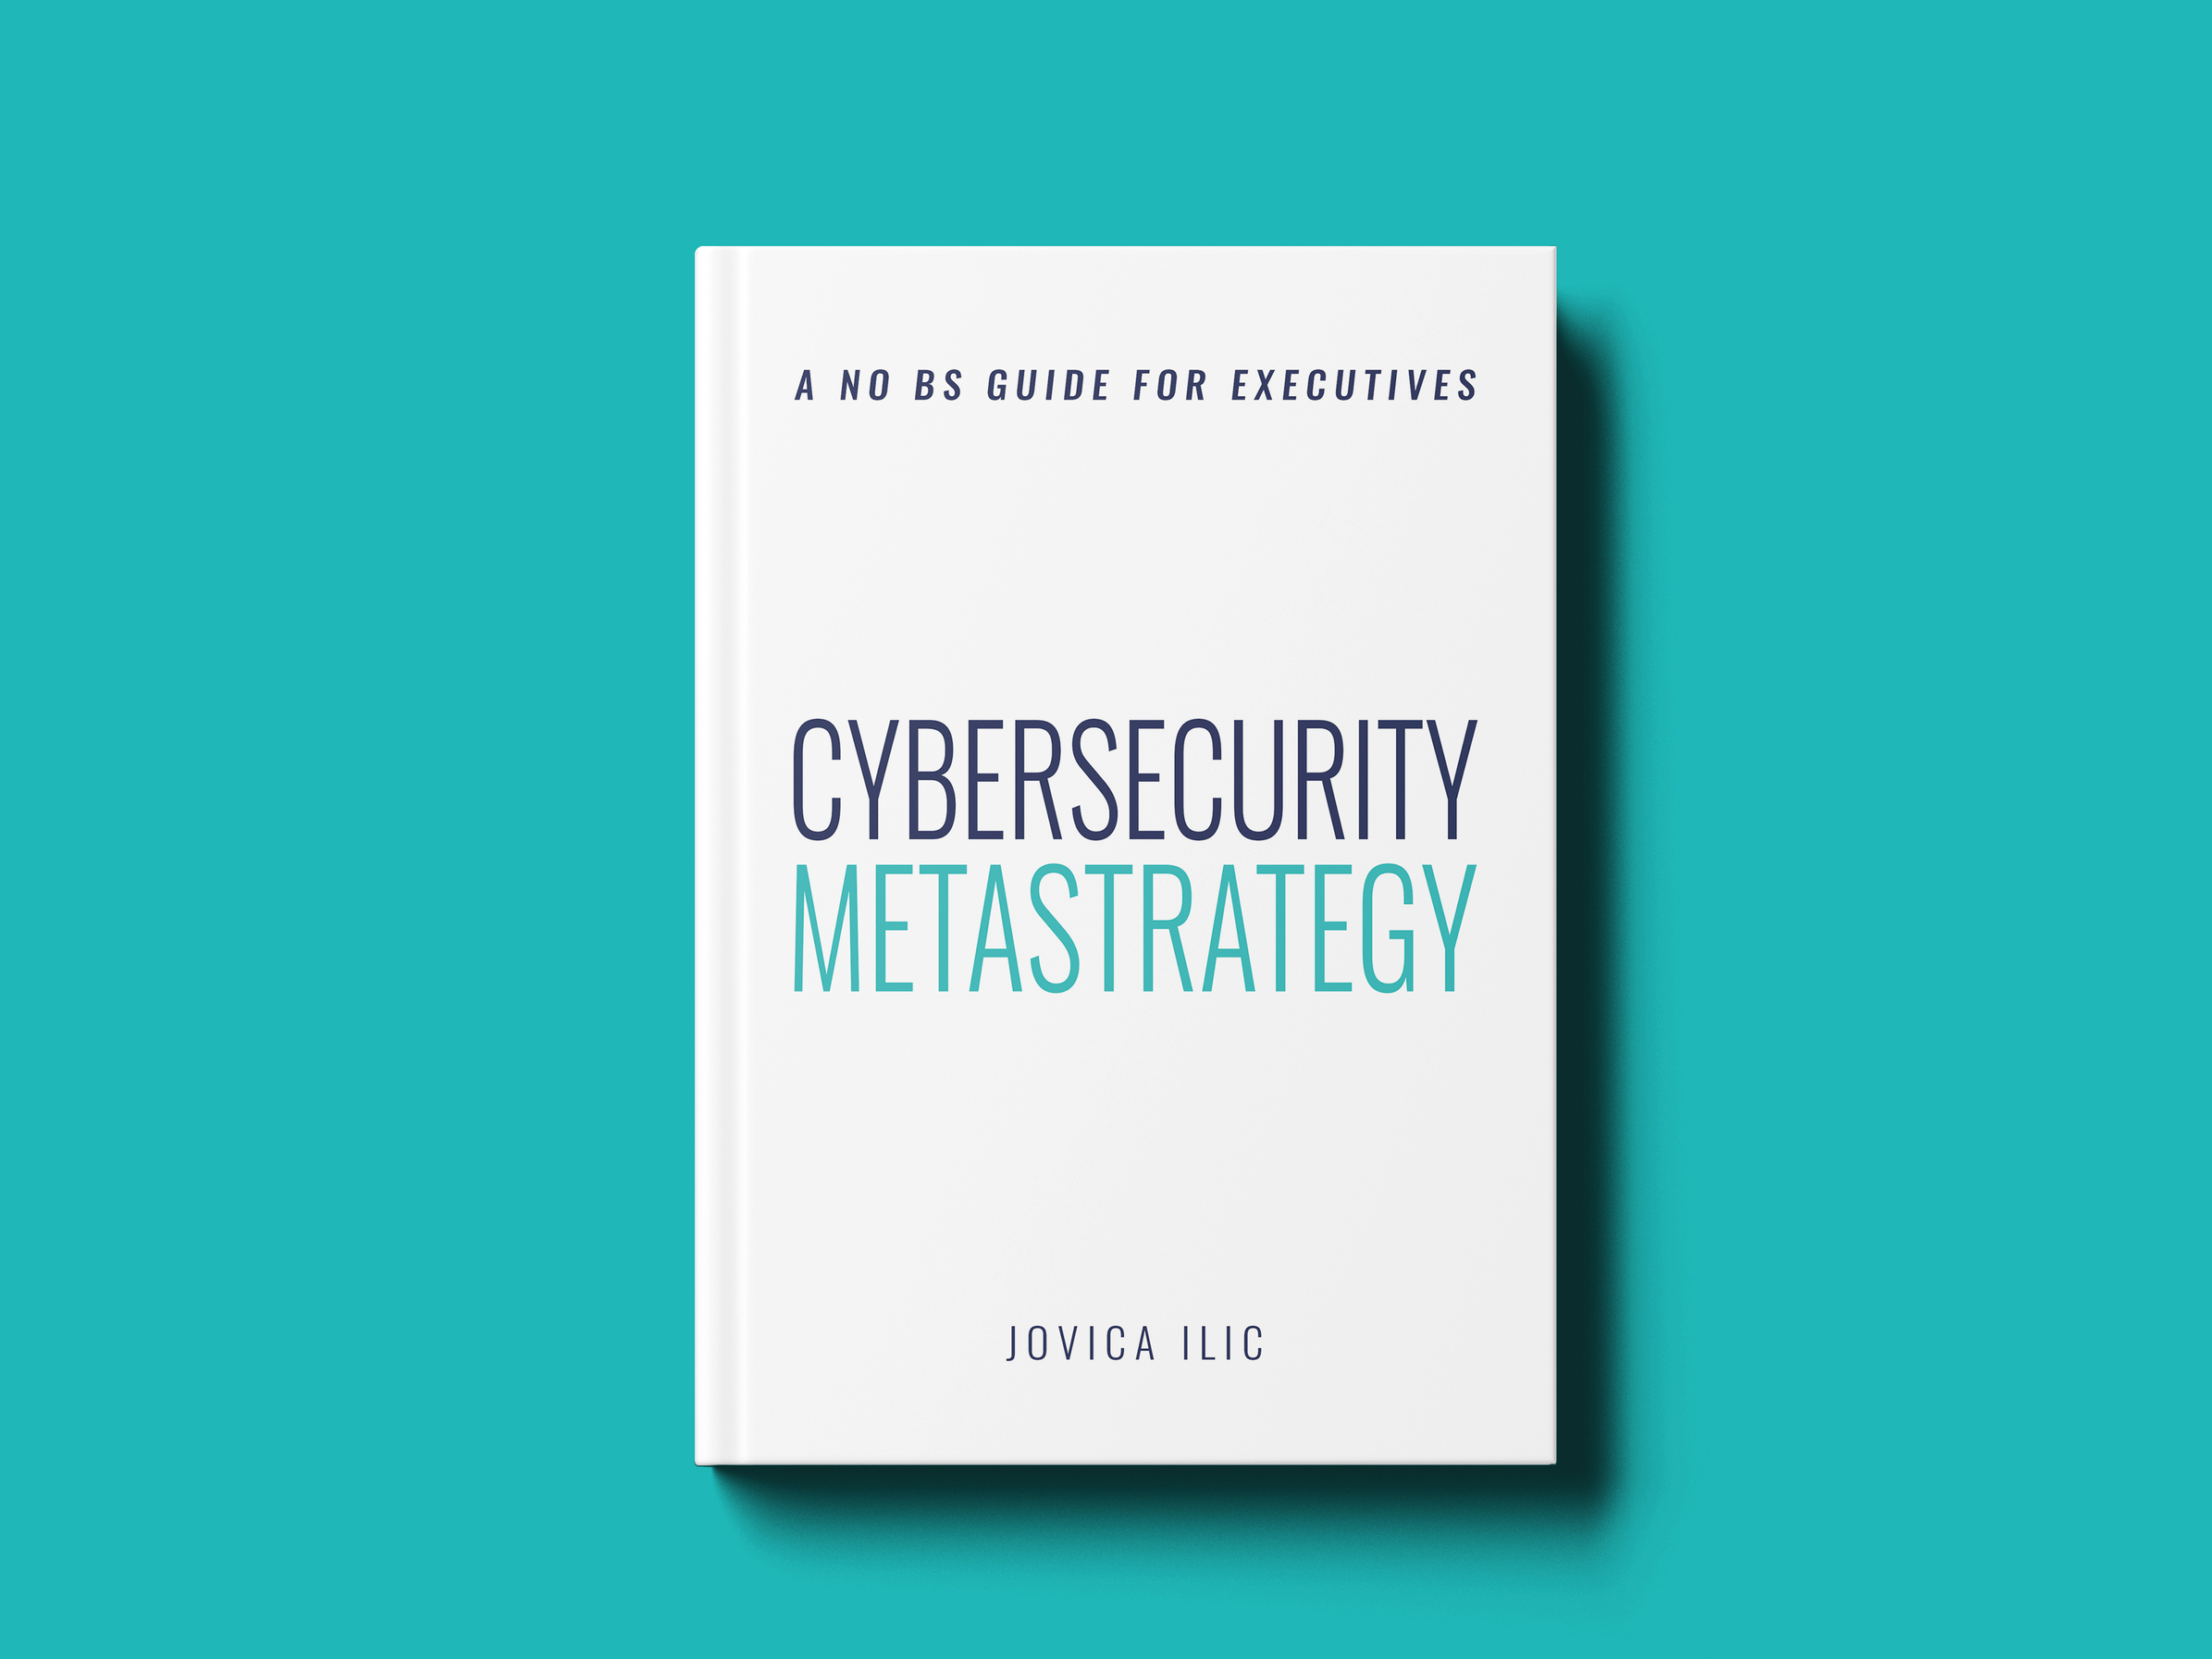 Cybersecurity Metastrategy book